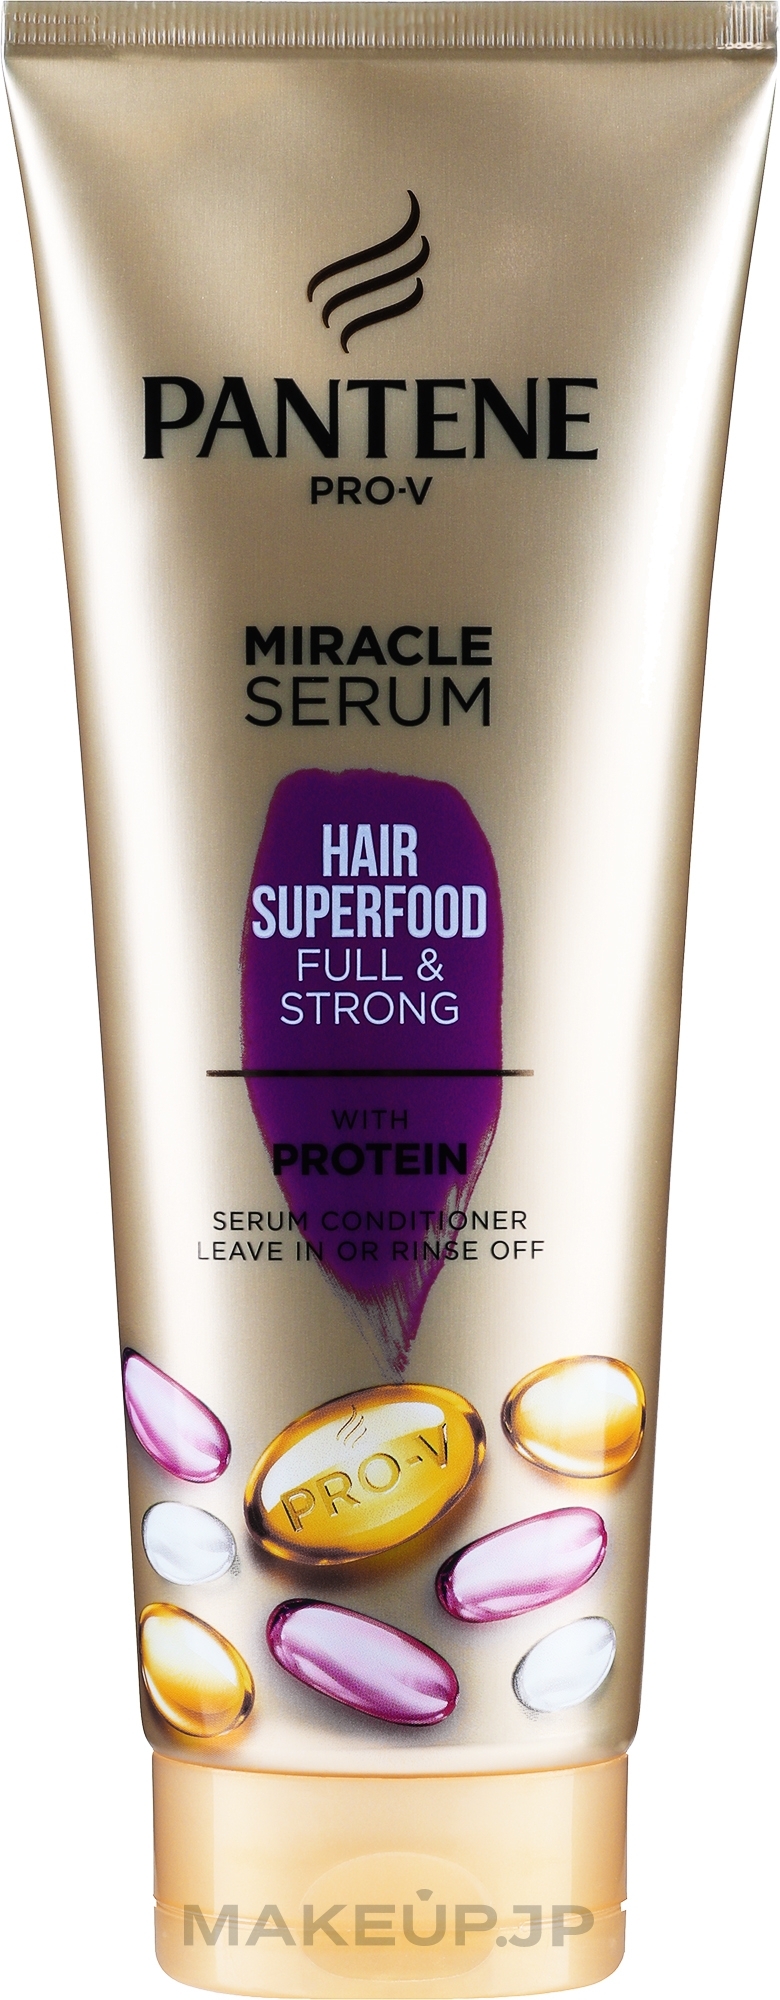 Damaged Hair Conditioner - Pantene Pro-V Miracle Serum Hair Superfood Full & Strong With Protein Serum Conditioner — photo 200 ml